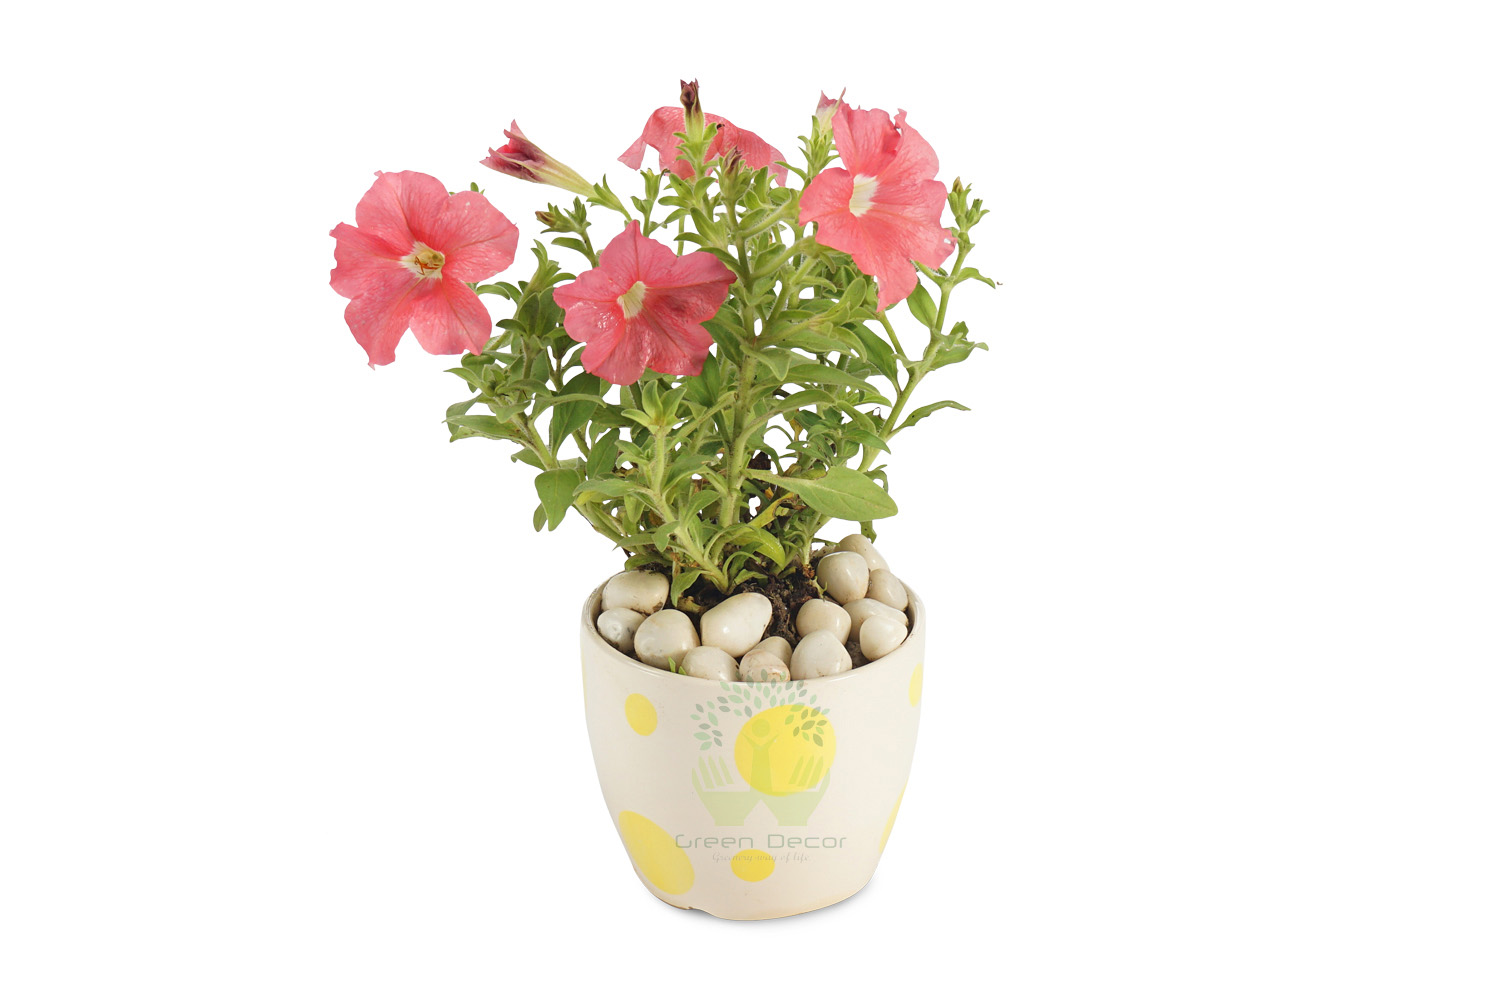 Buy Petunia Plants , White Pots and seeds in Delhi NCR by the best online nursery shop Greendecor.